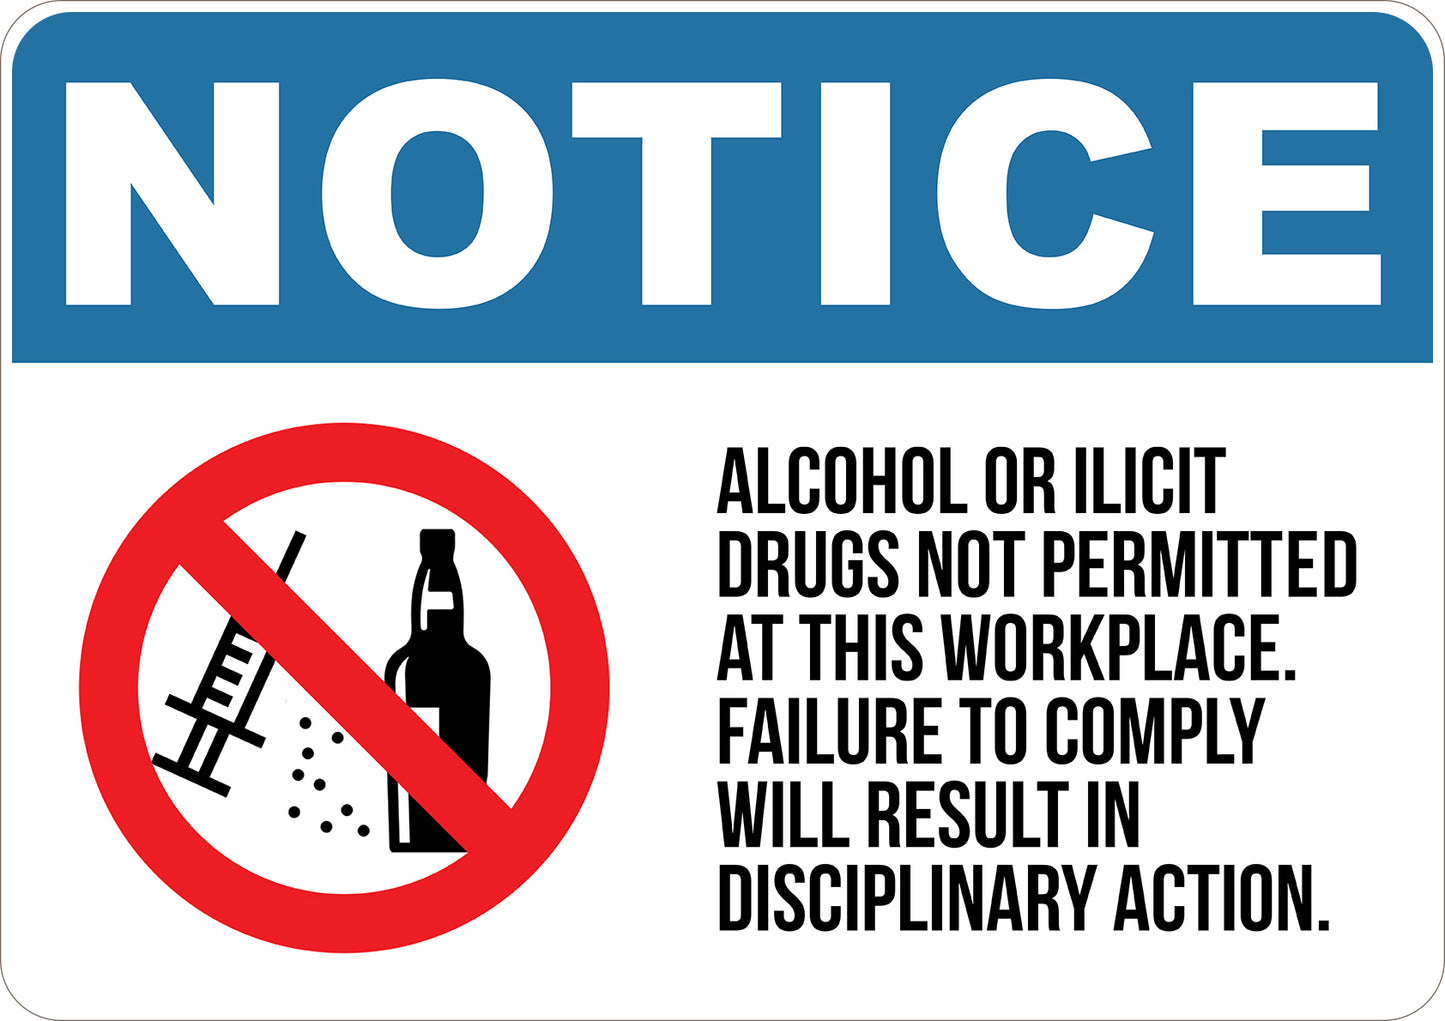 Alcohol or Ilicit Drugs Not Permitted at the Workplace. Failure to Comply will Result in Disciplinary Action Printed Sign